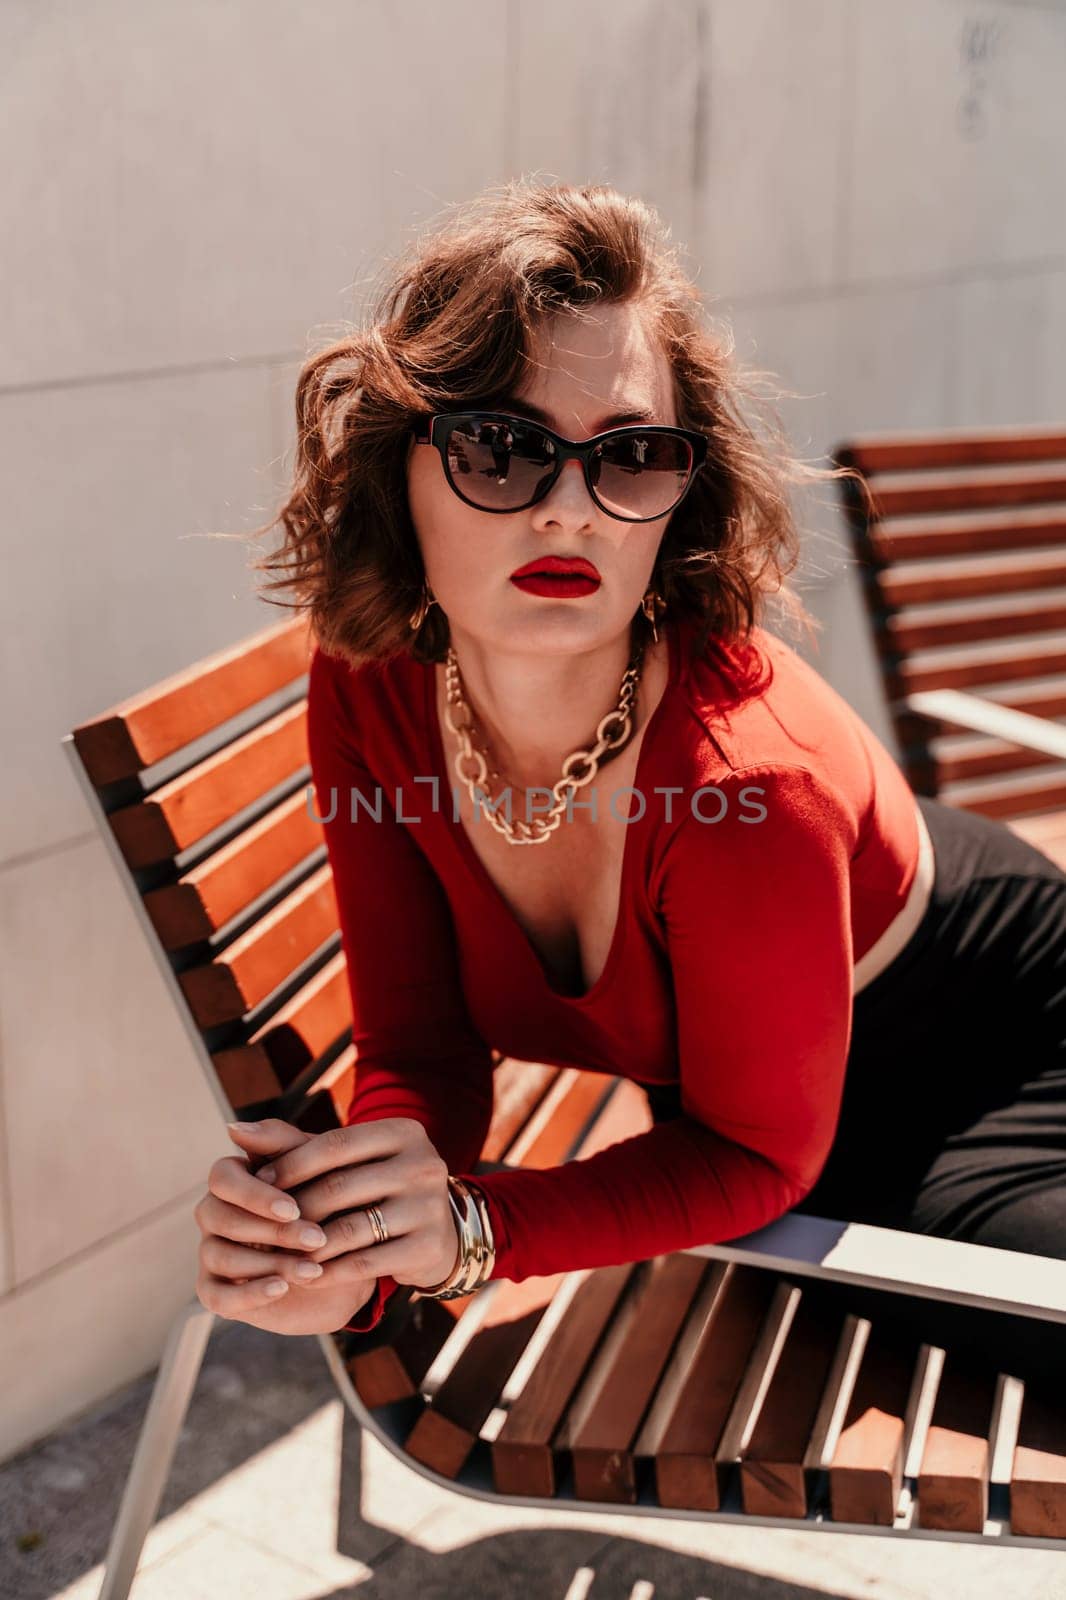 Portrait of a woman on the street. An attractive woman in glasses, a red blouse and a black skirt is sitting on a bench outside. by Matiunina